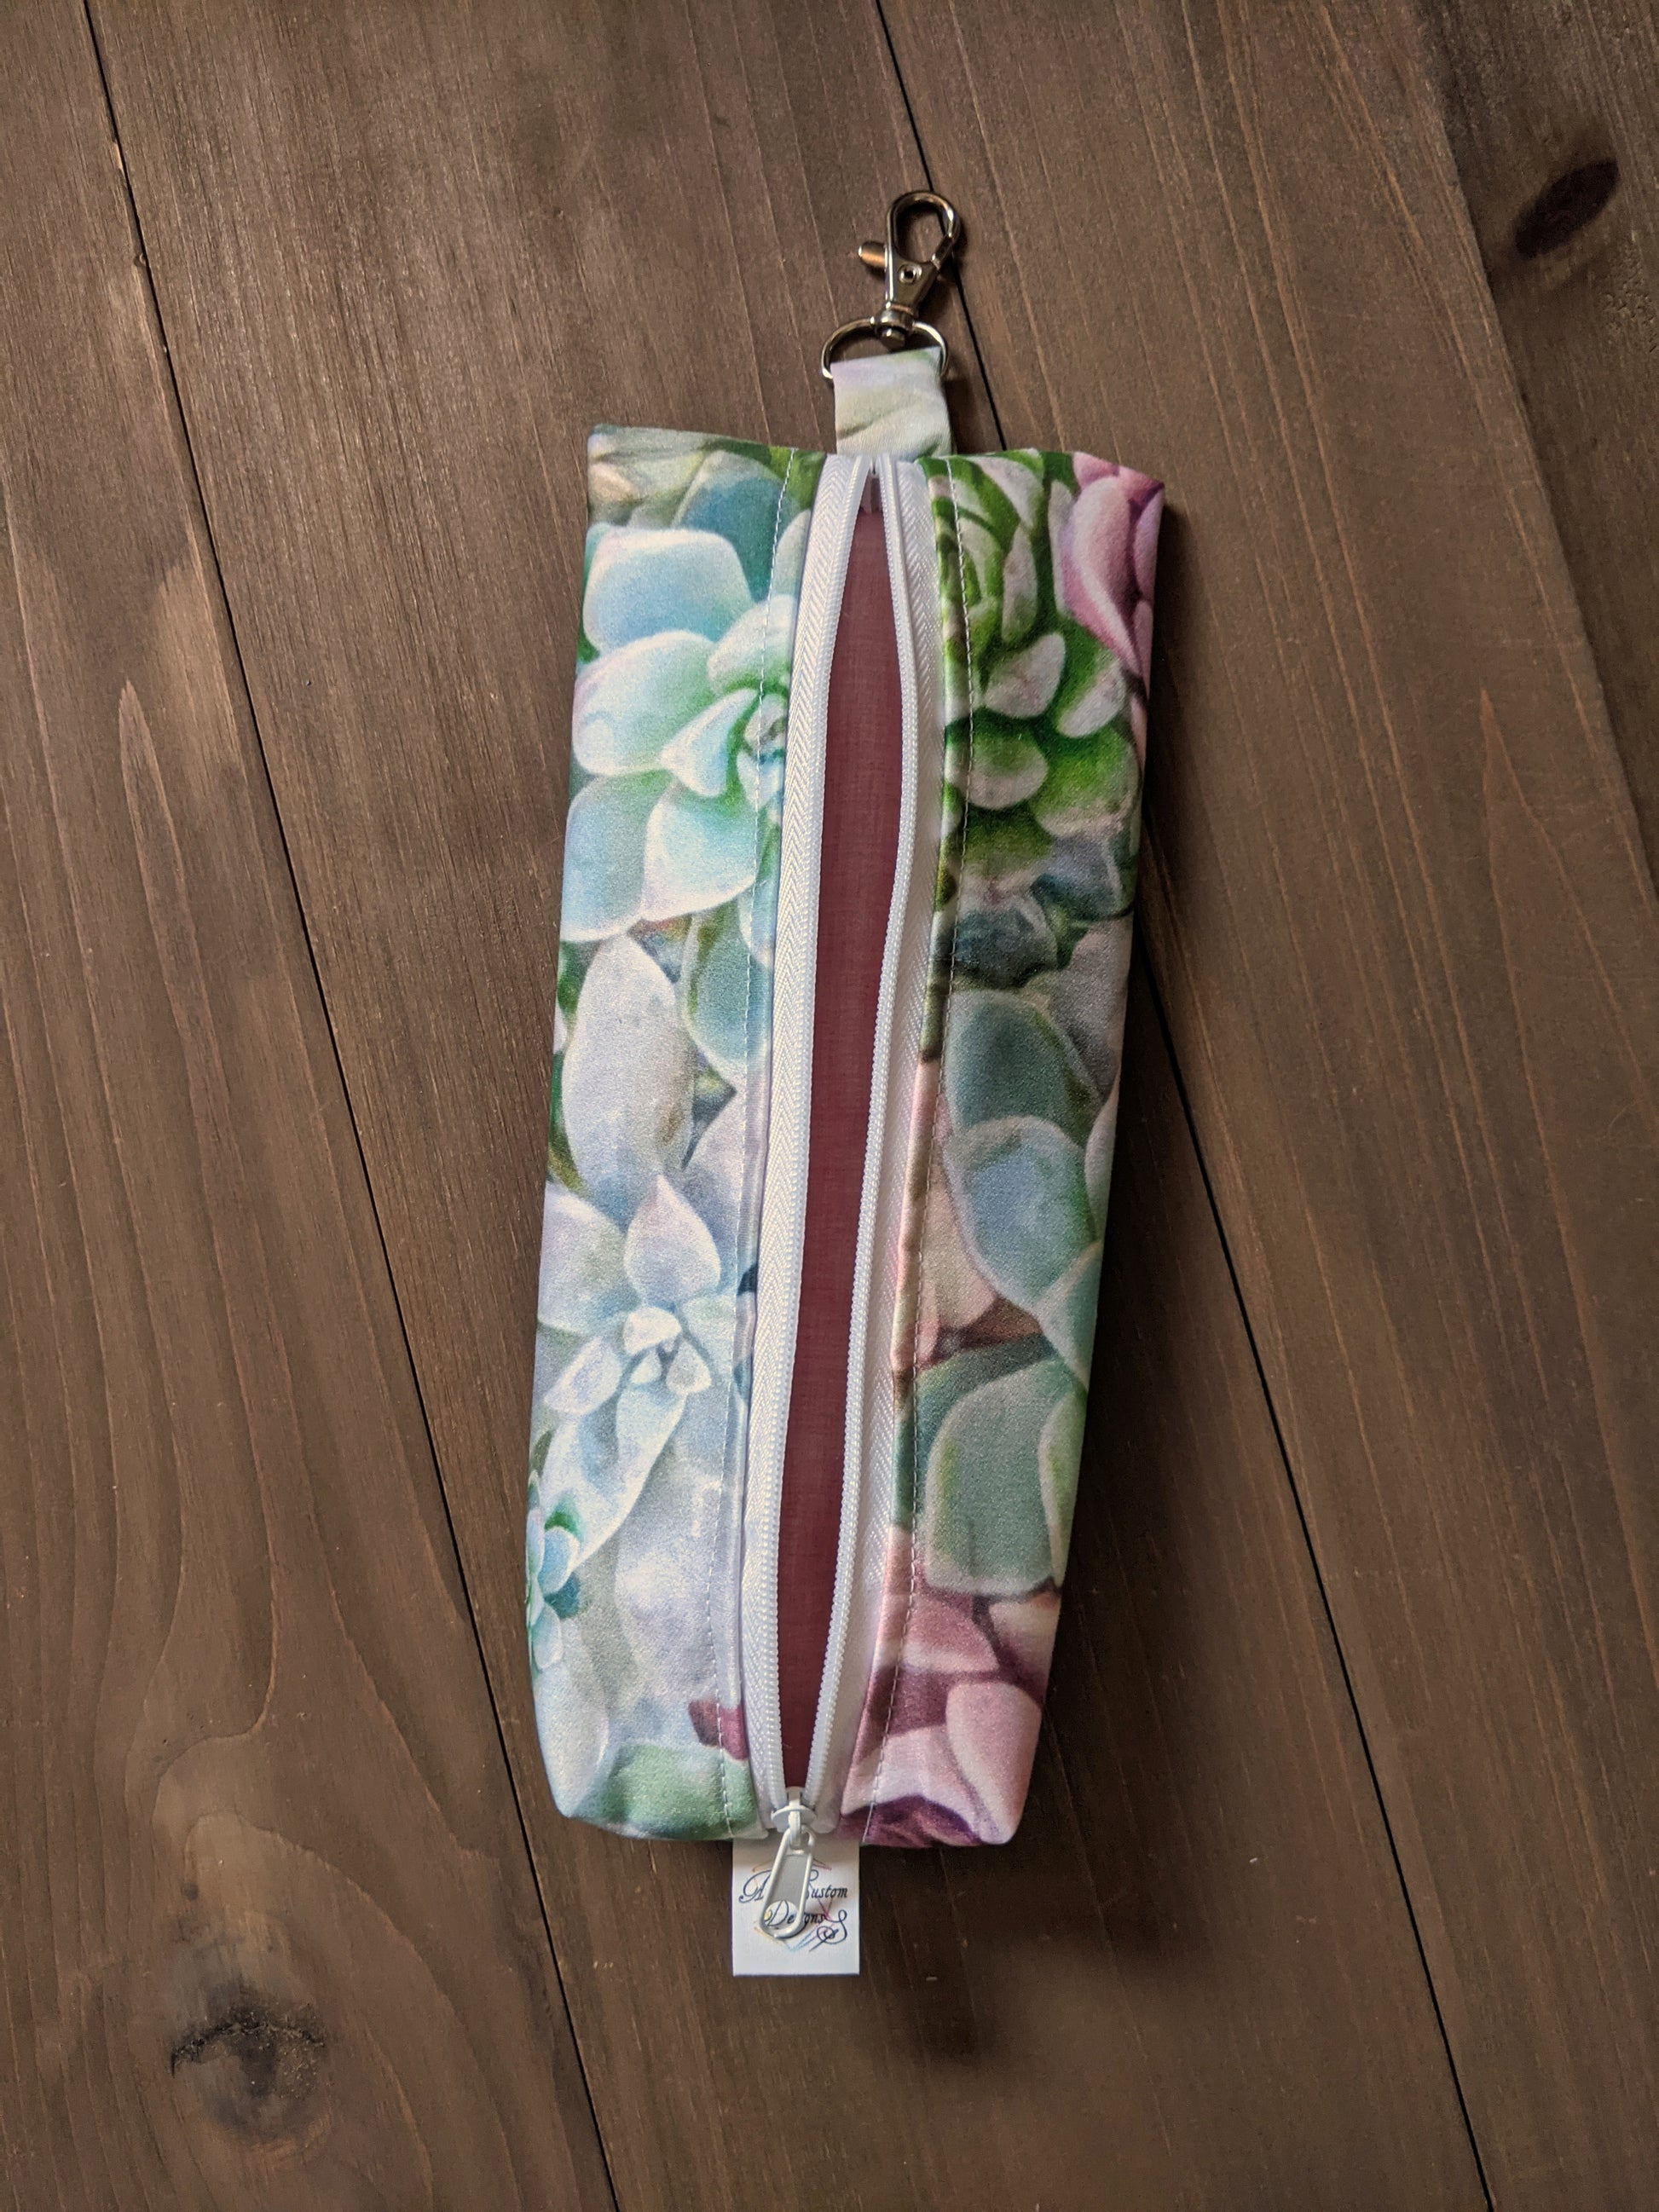 A zippered bag with pastel succulent fabric sits on a wood surface.